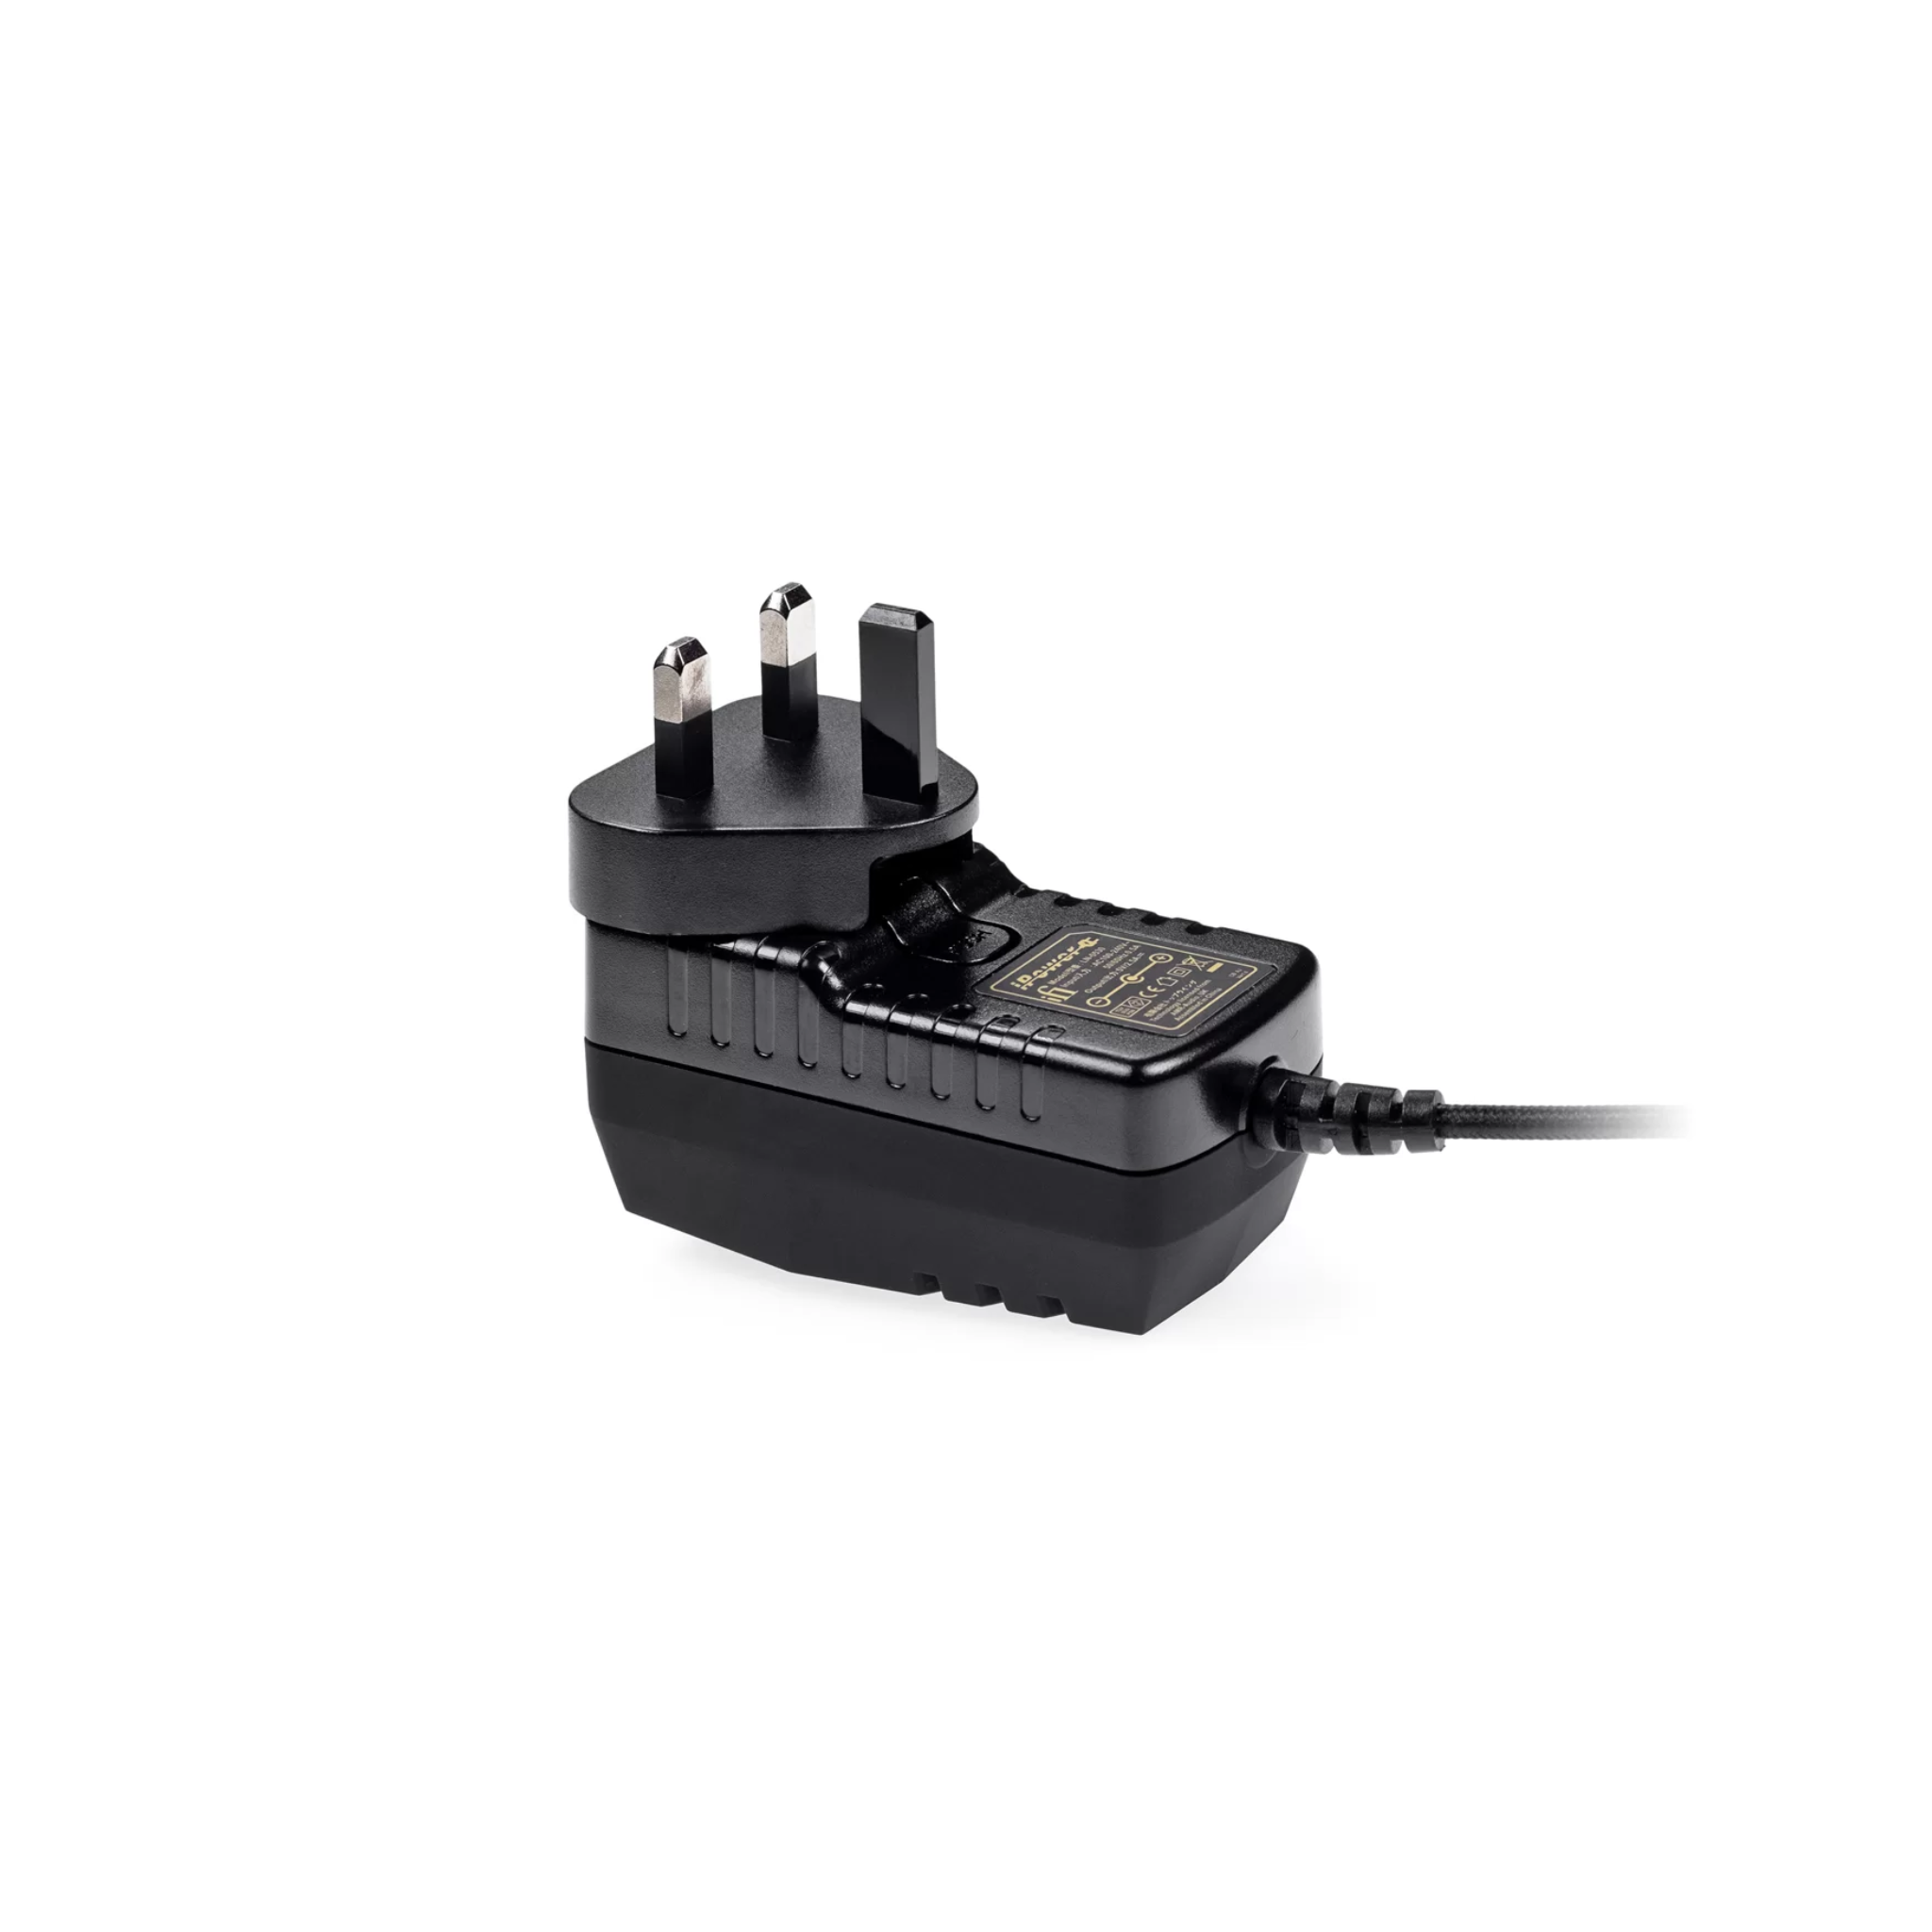 iFi iPower2 Low Noise DC Power Supply – Superfi